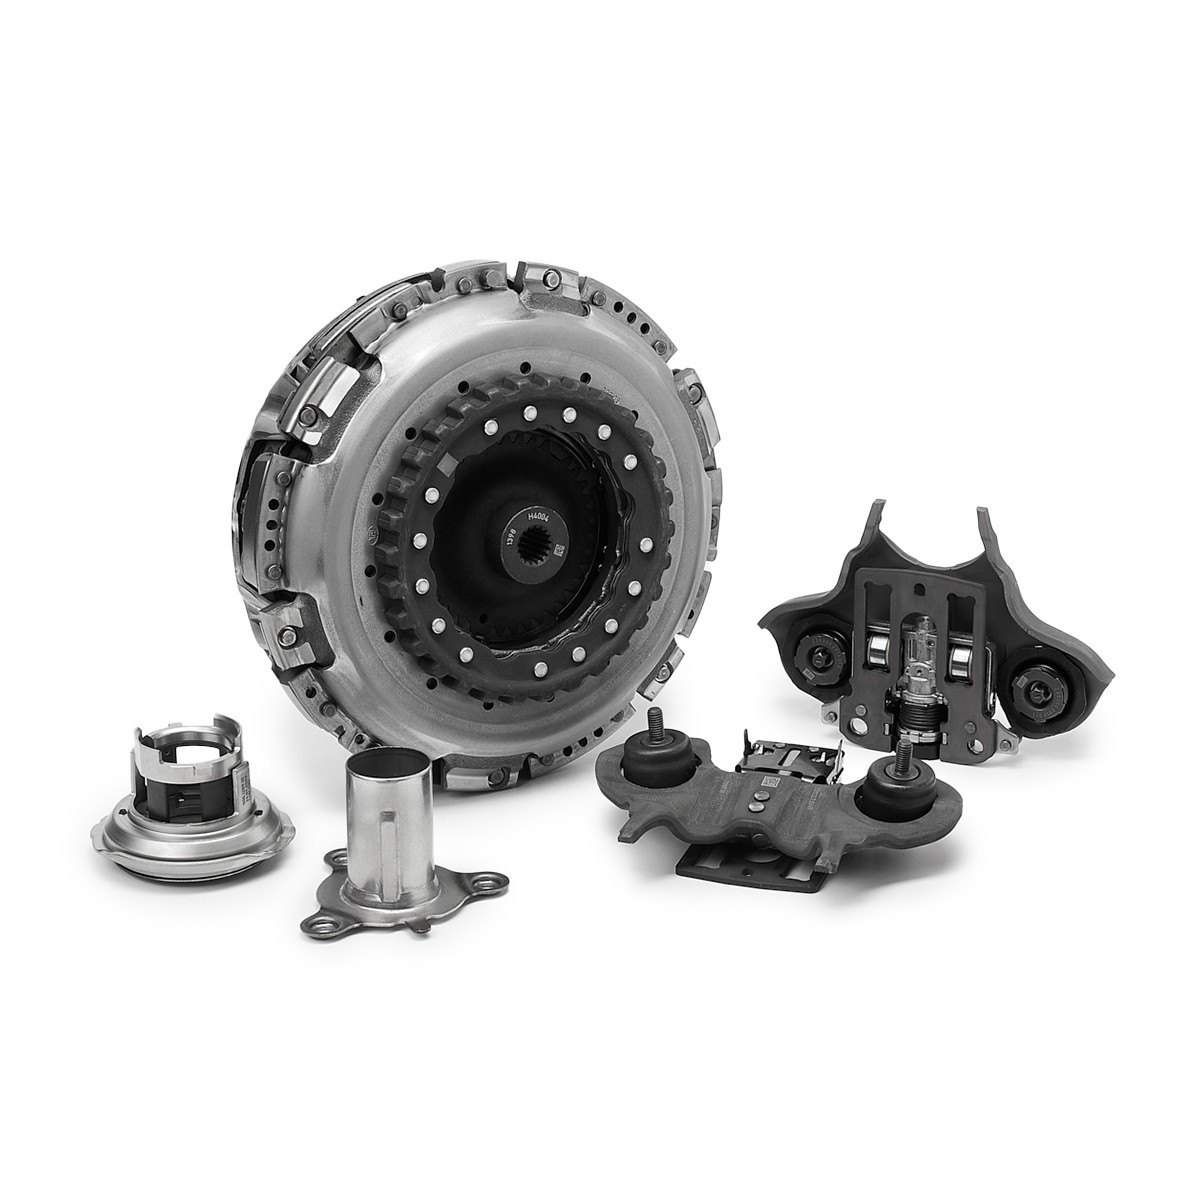 LuK 602 0005 00 Clio 4 2021 Kit d'embrayage complet